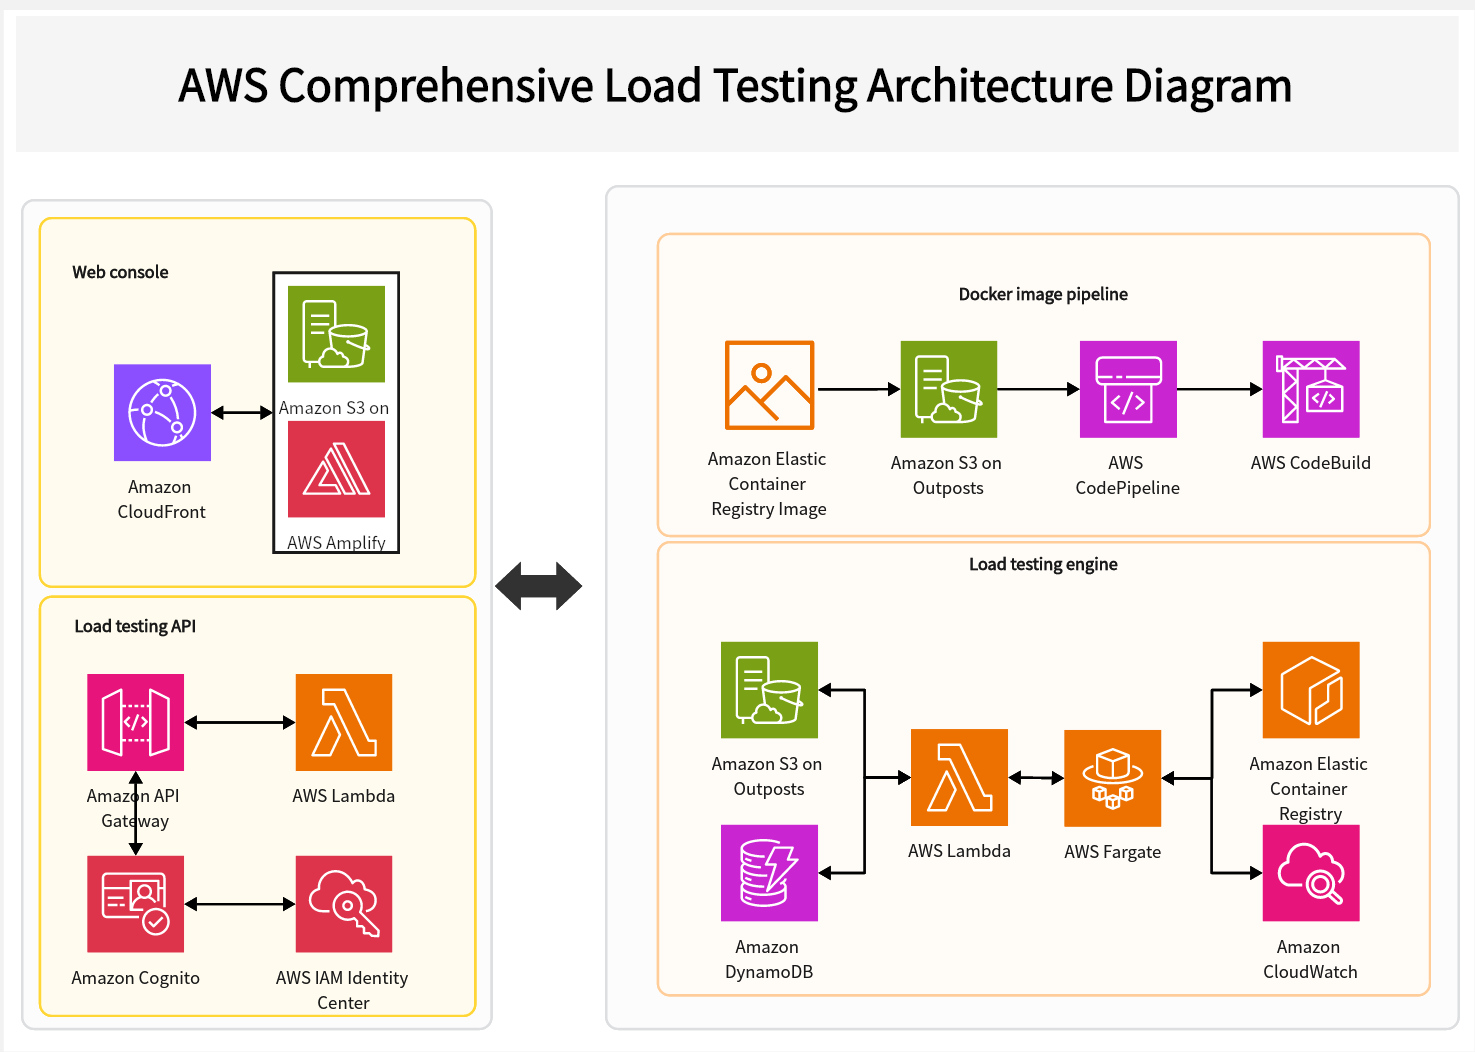 aws-comprehensive-load-testing-architecture-diagram.png